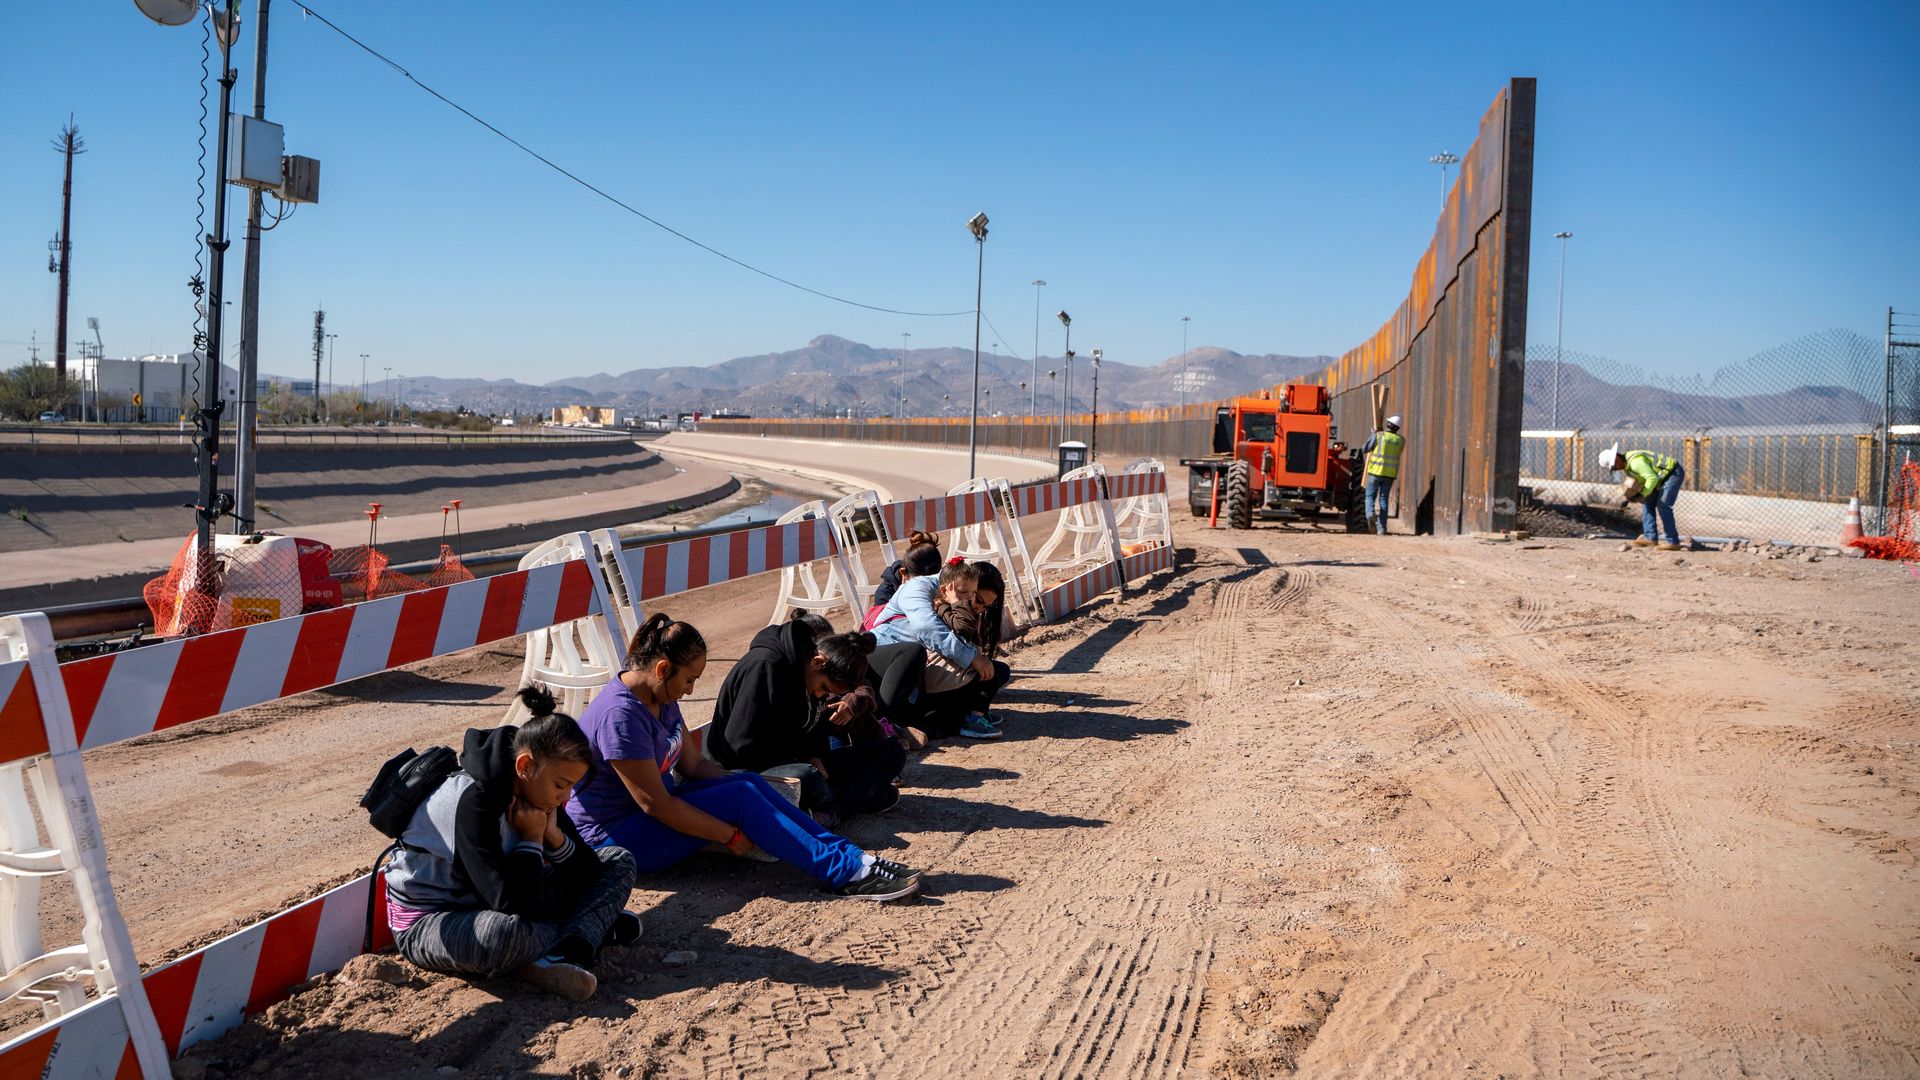 migrants wait for a transport to arrive after turning themselves into US Border Patrol by border fence under construction 